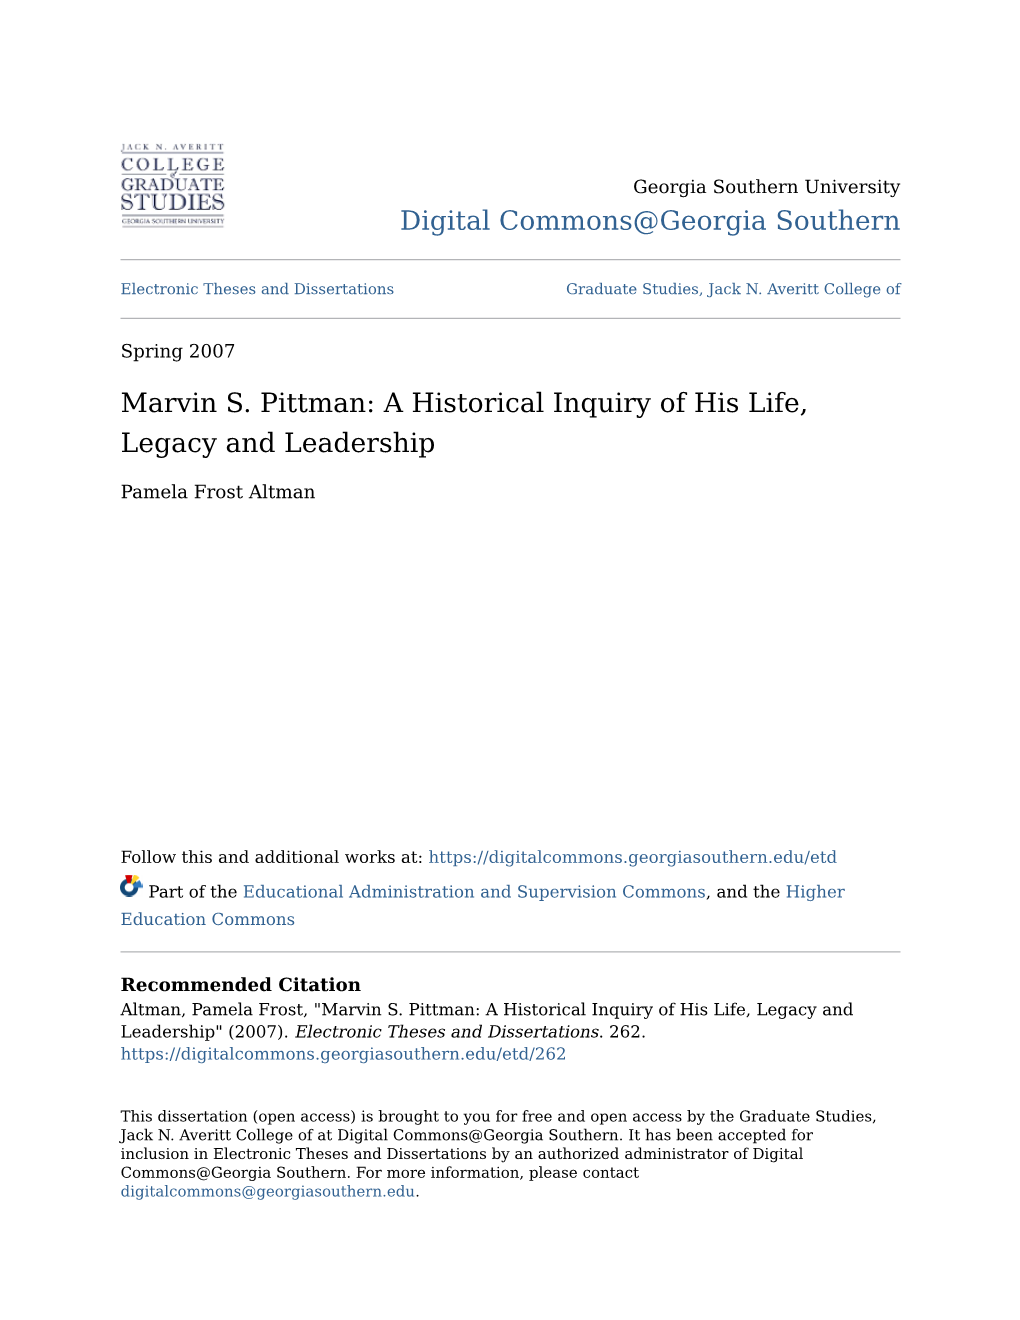 Marvin S. Pittman: a Historical Inquiry of His Life, Legacy and Leadership